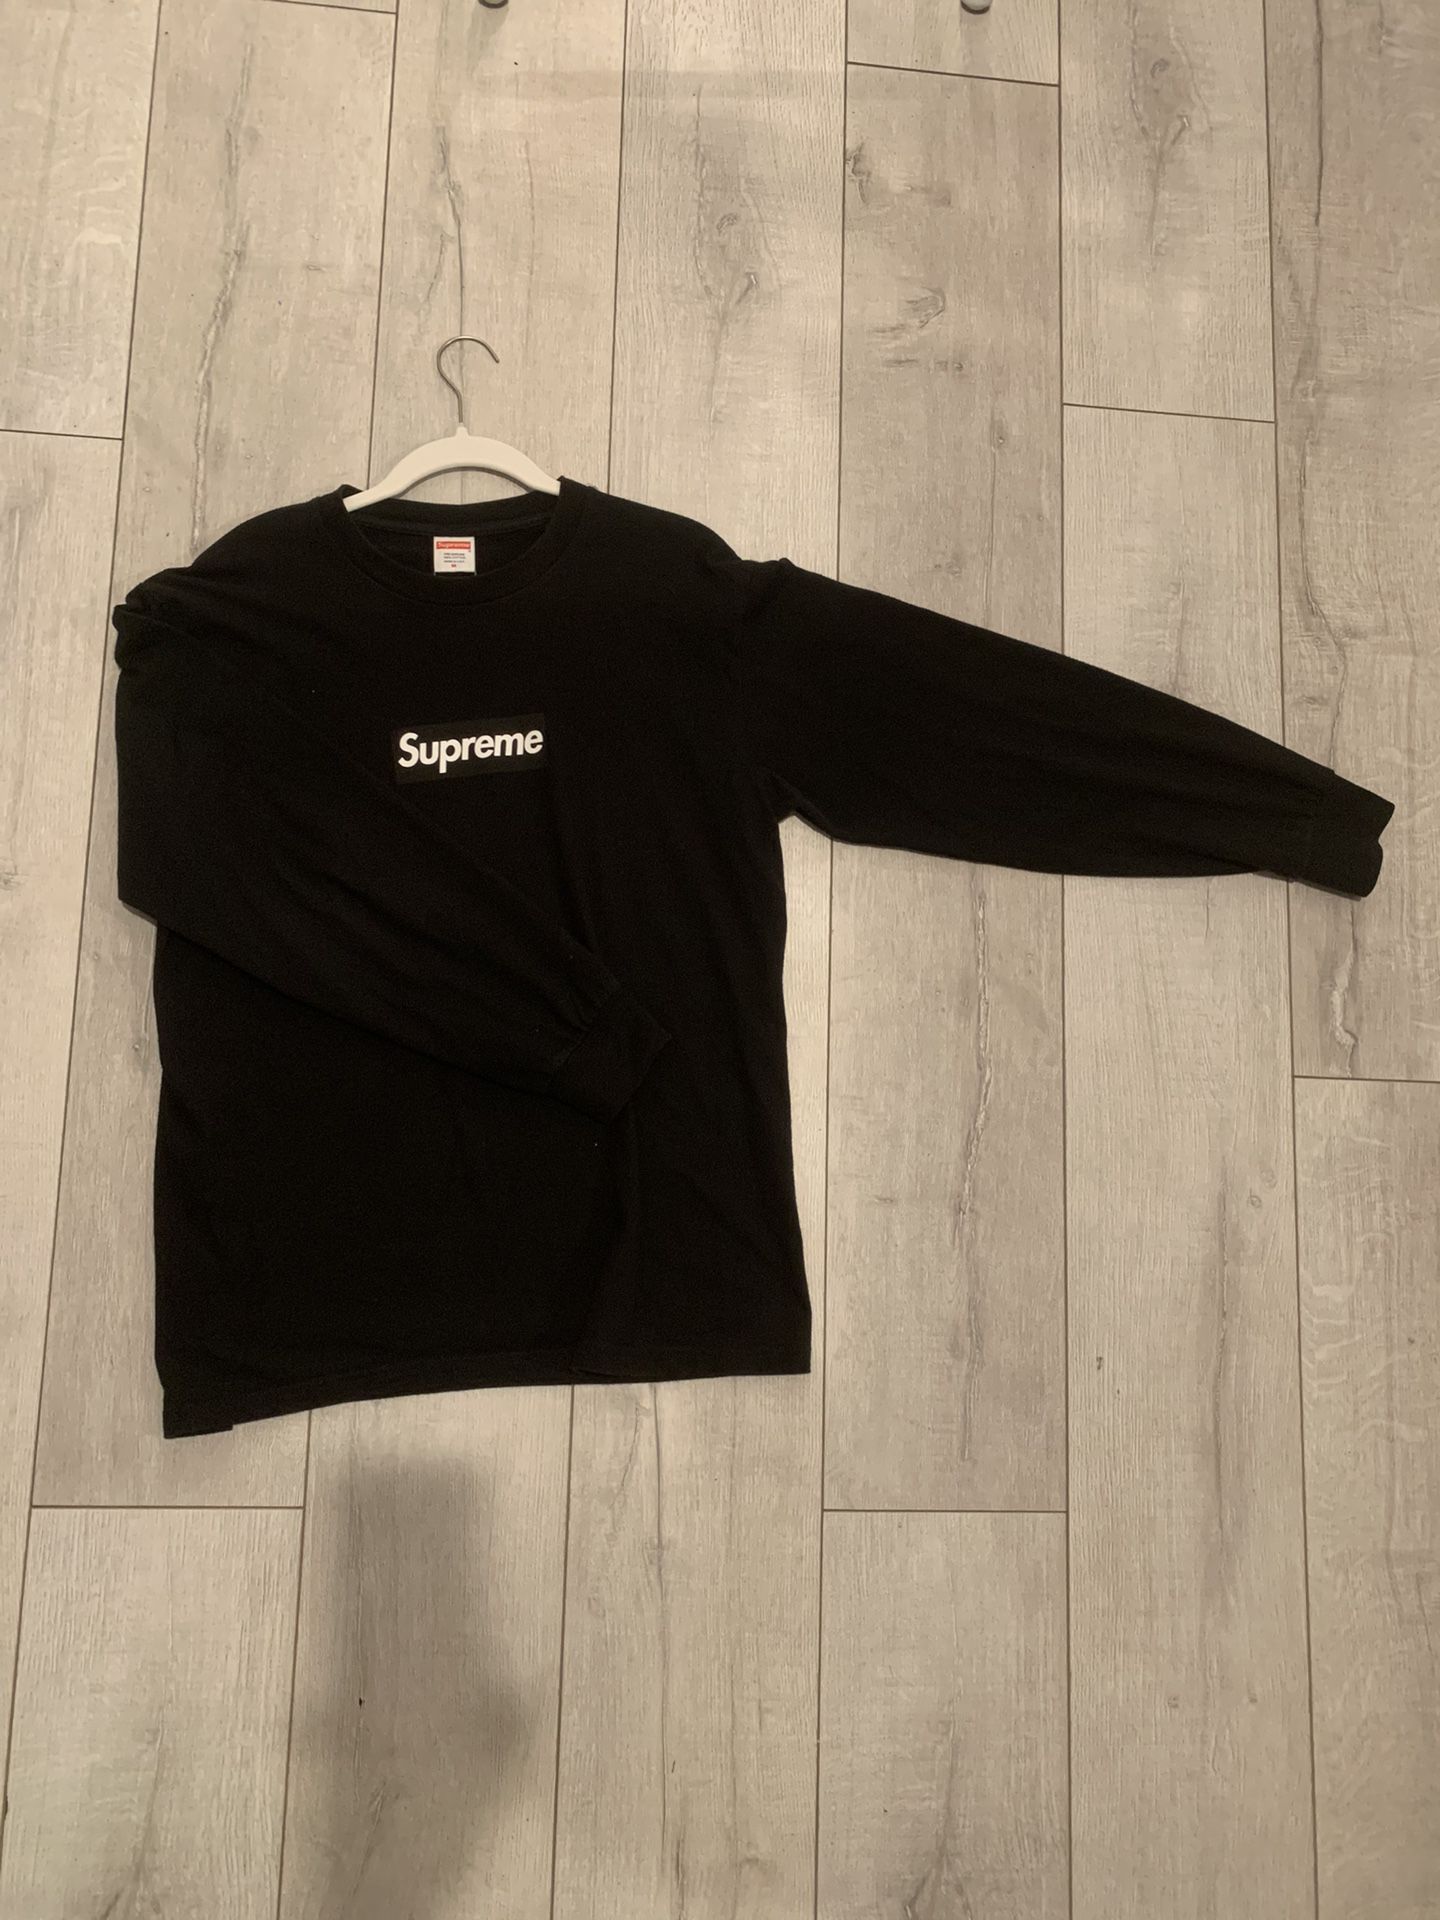 Supreme x Louis Vuitton Box Logo T-Shirt for Sale in Beverly Hills, CA -  OfferUp